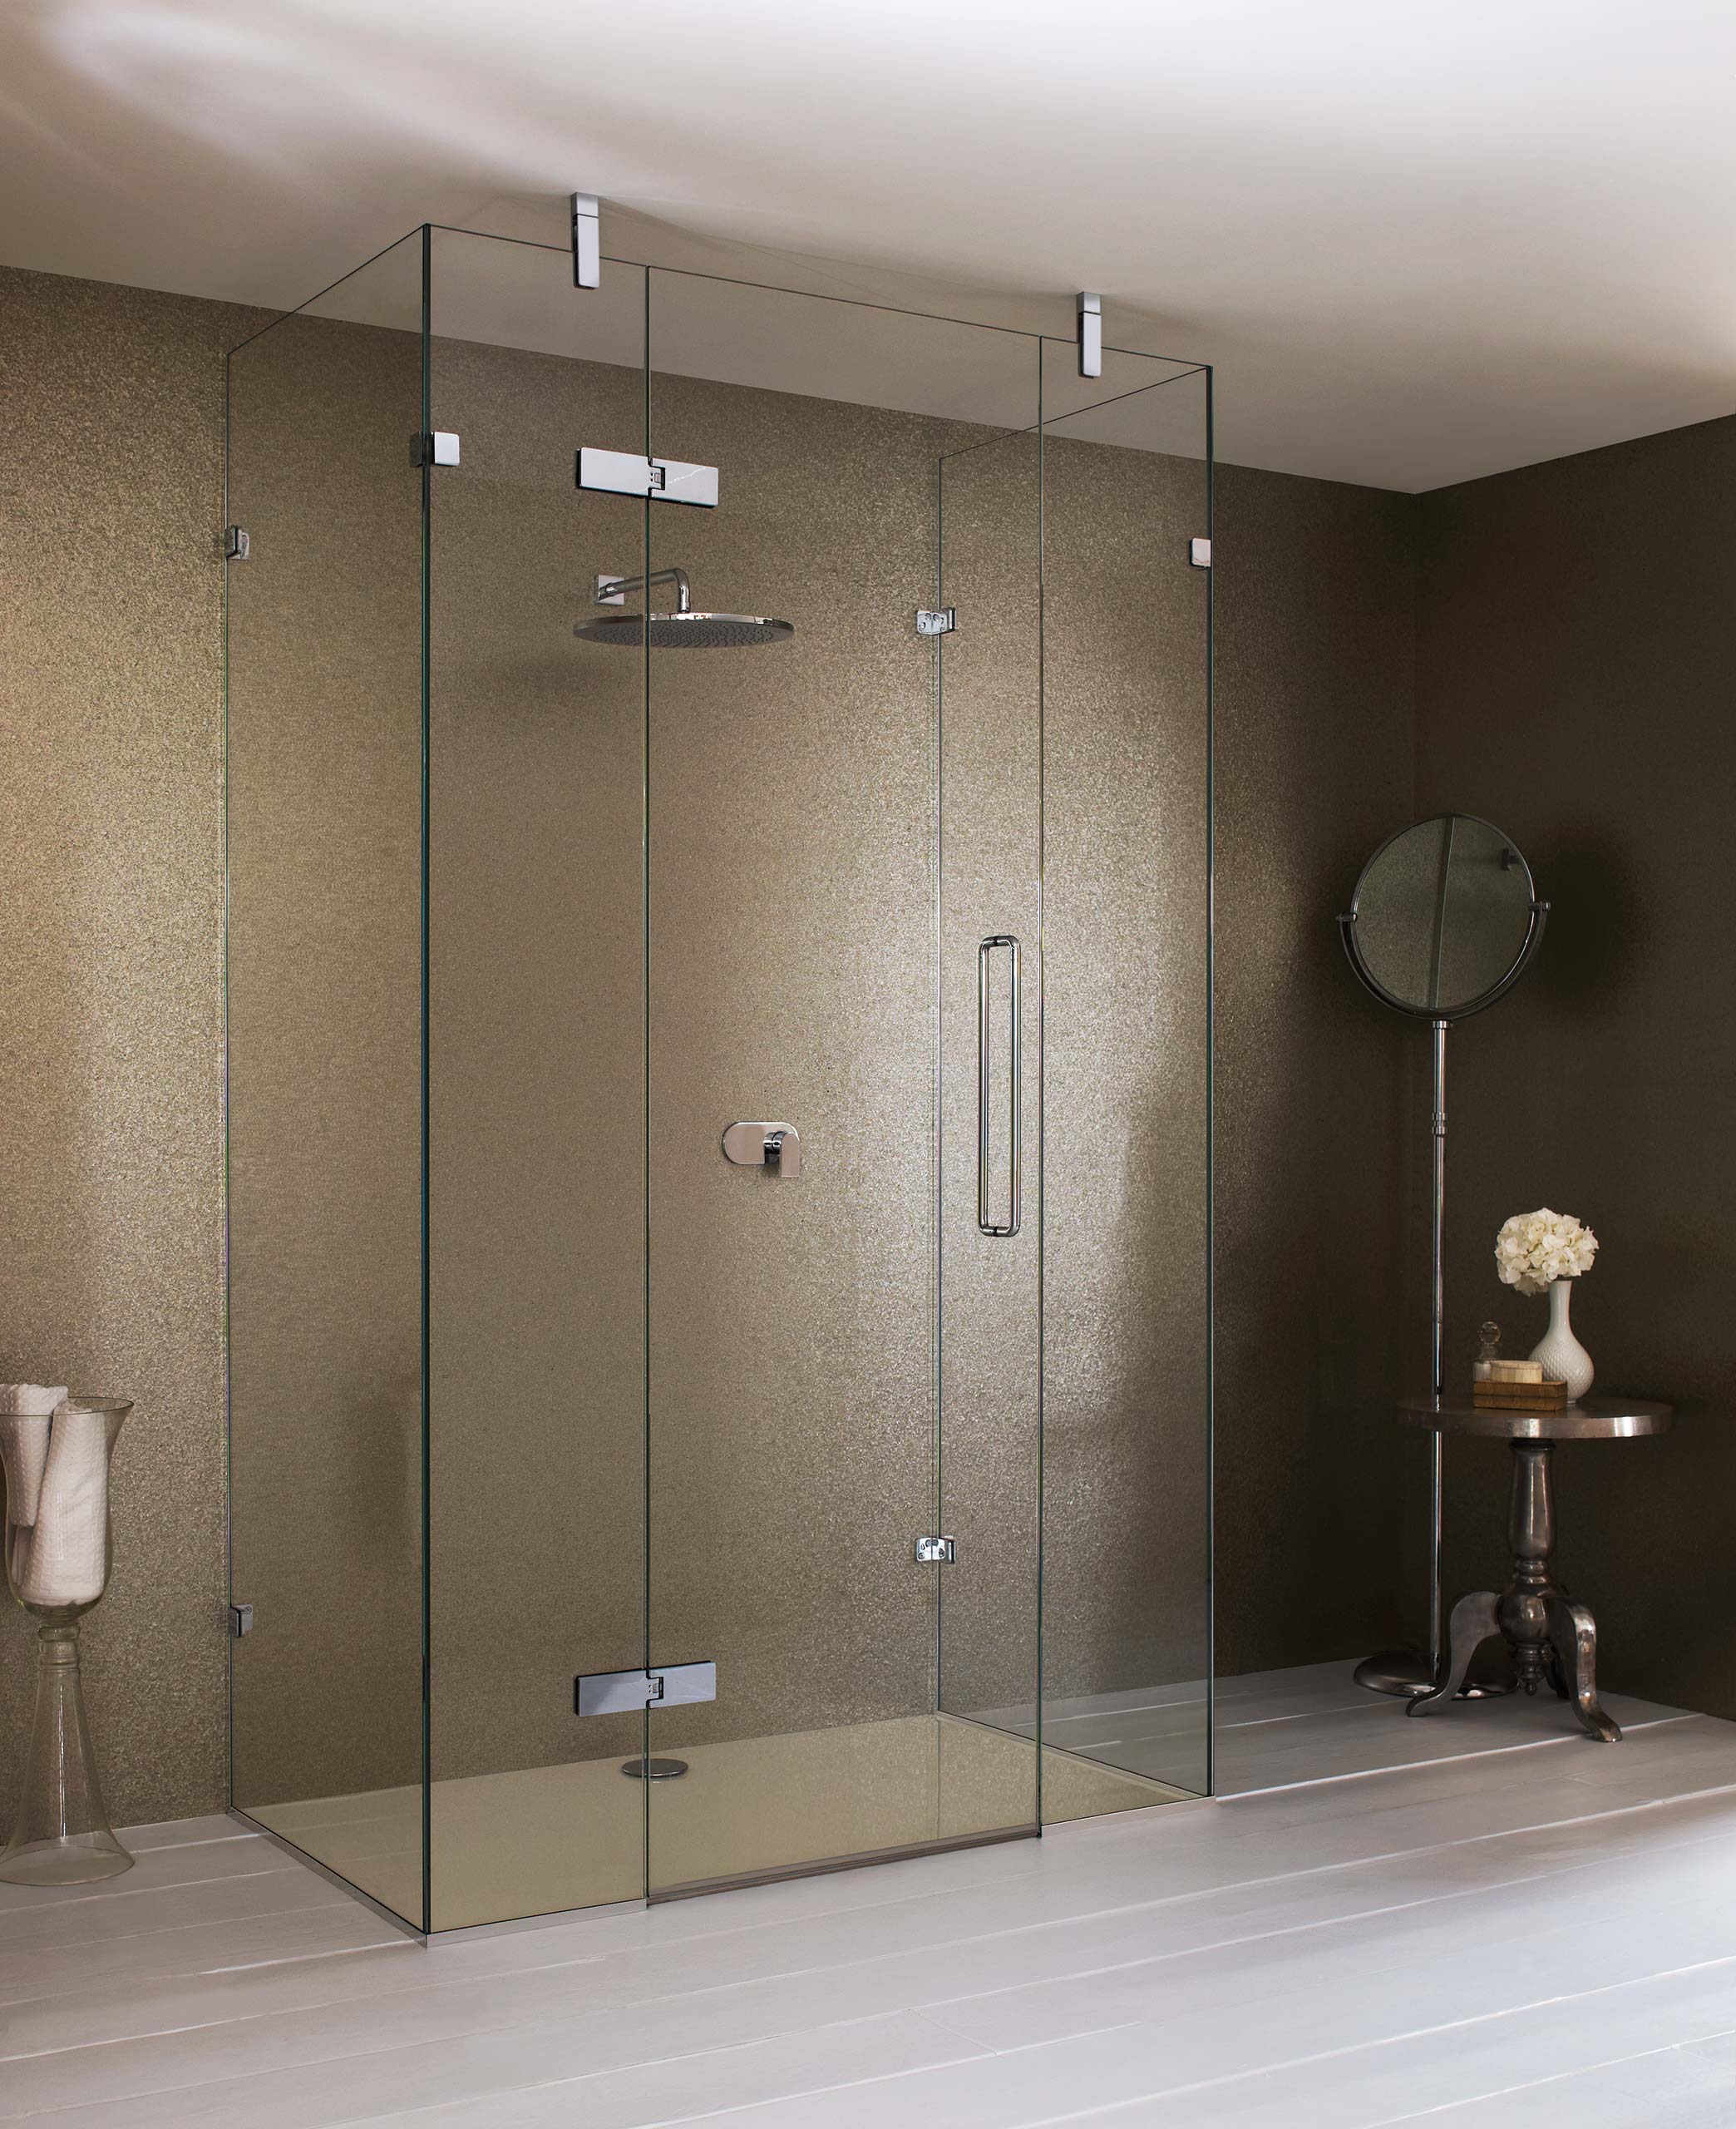 Barcelona Shower Enclosure by Majestic